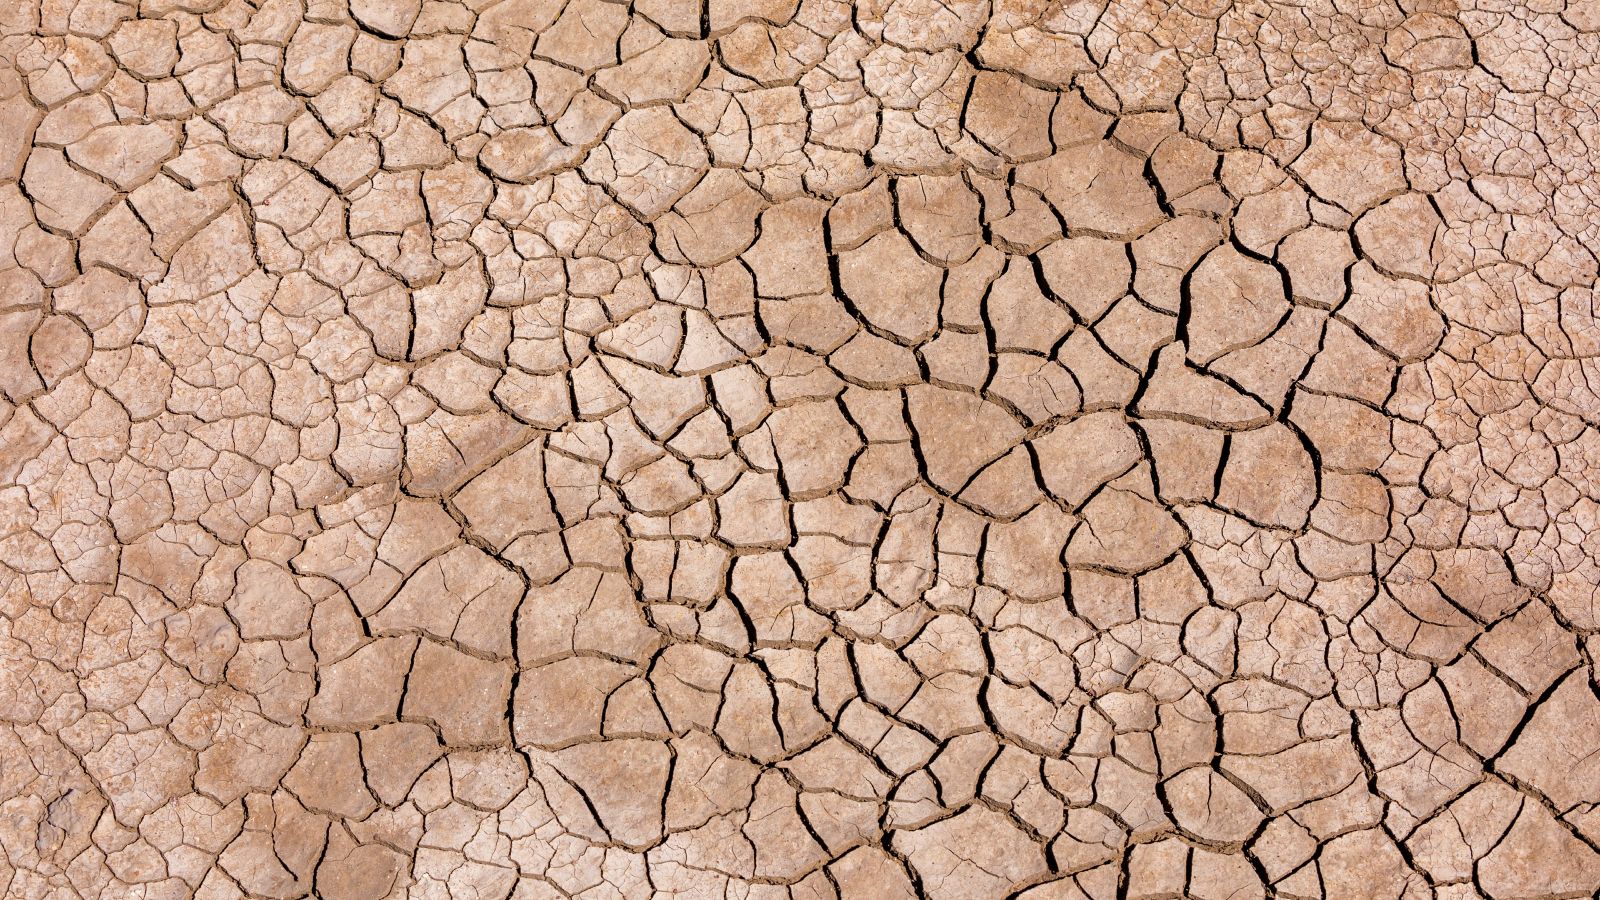 Parched earth during a drought